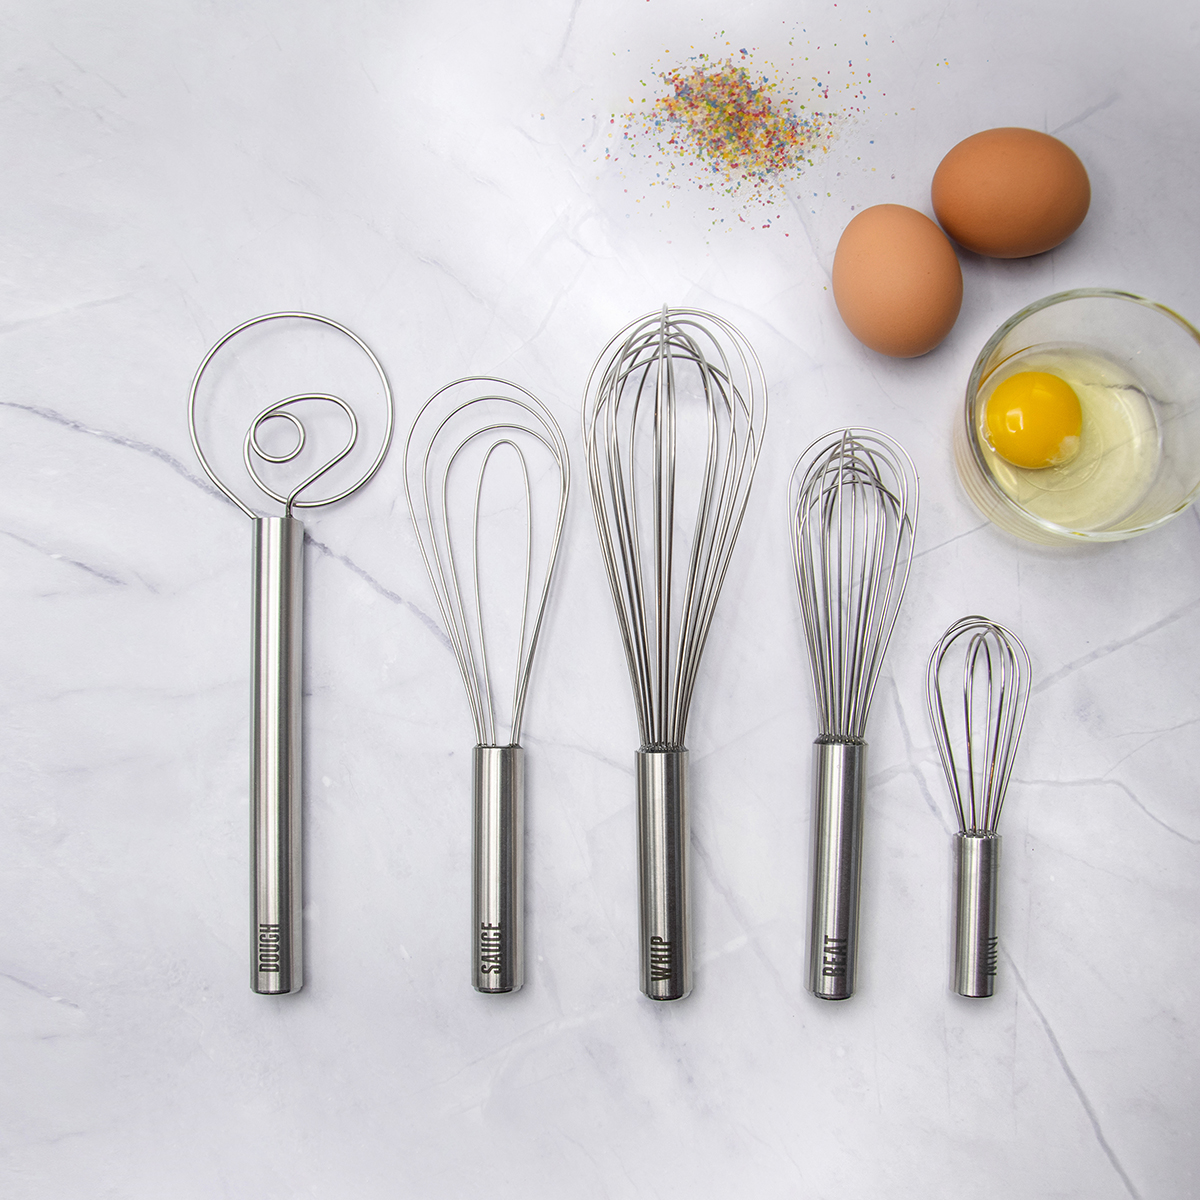 https://www.containerstore.com/catalogimages/514657/10098755_SS_Whisk_Bundle_Lifestyle_0.jpg